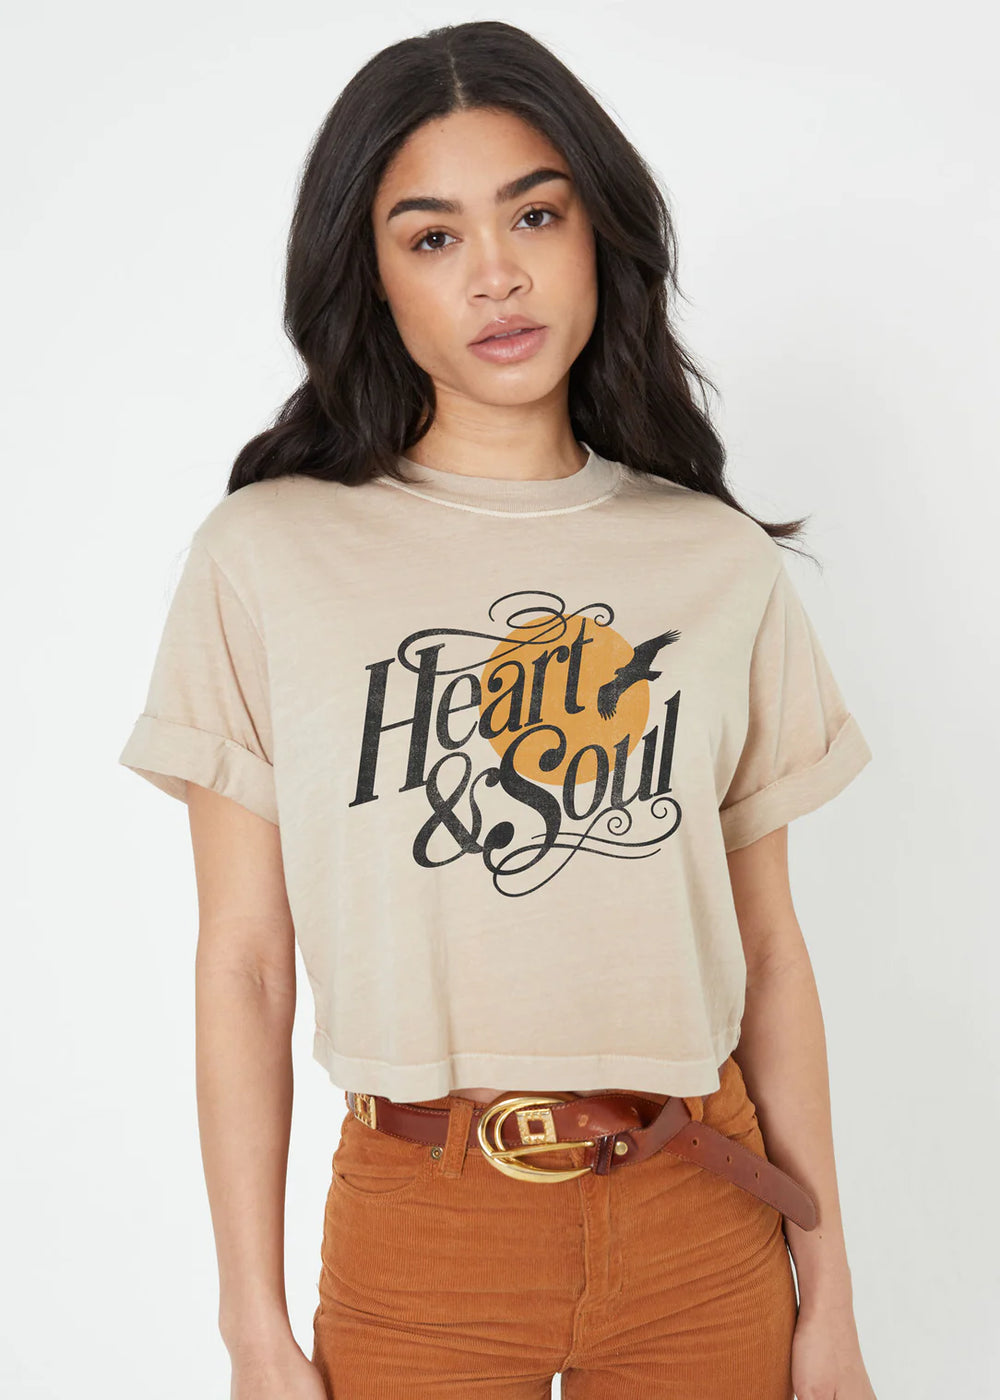 Upgrade your wardrobe with the Heart and Soul Crop Boyfriend Graphic Tee from Girl Dangerous. Made from 100% cotton, this premium sand-colored tee is pigment dyed for a vintage look. Featuring hand grinded edges and rolled sleeves, this oversized "boyfriend" style tee offers a soft and high quality feel. With a cropped fit, this tee is perfect for everyday wear. Model is wearing size small.